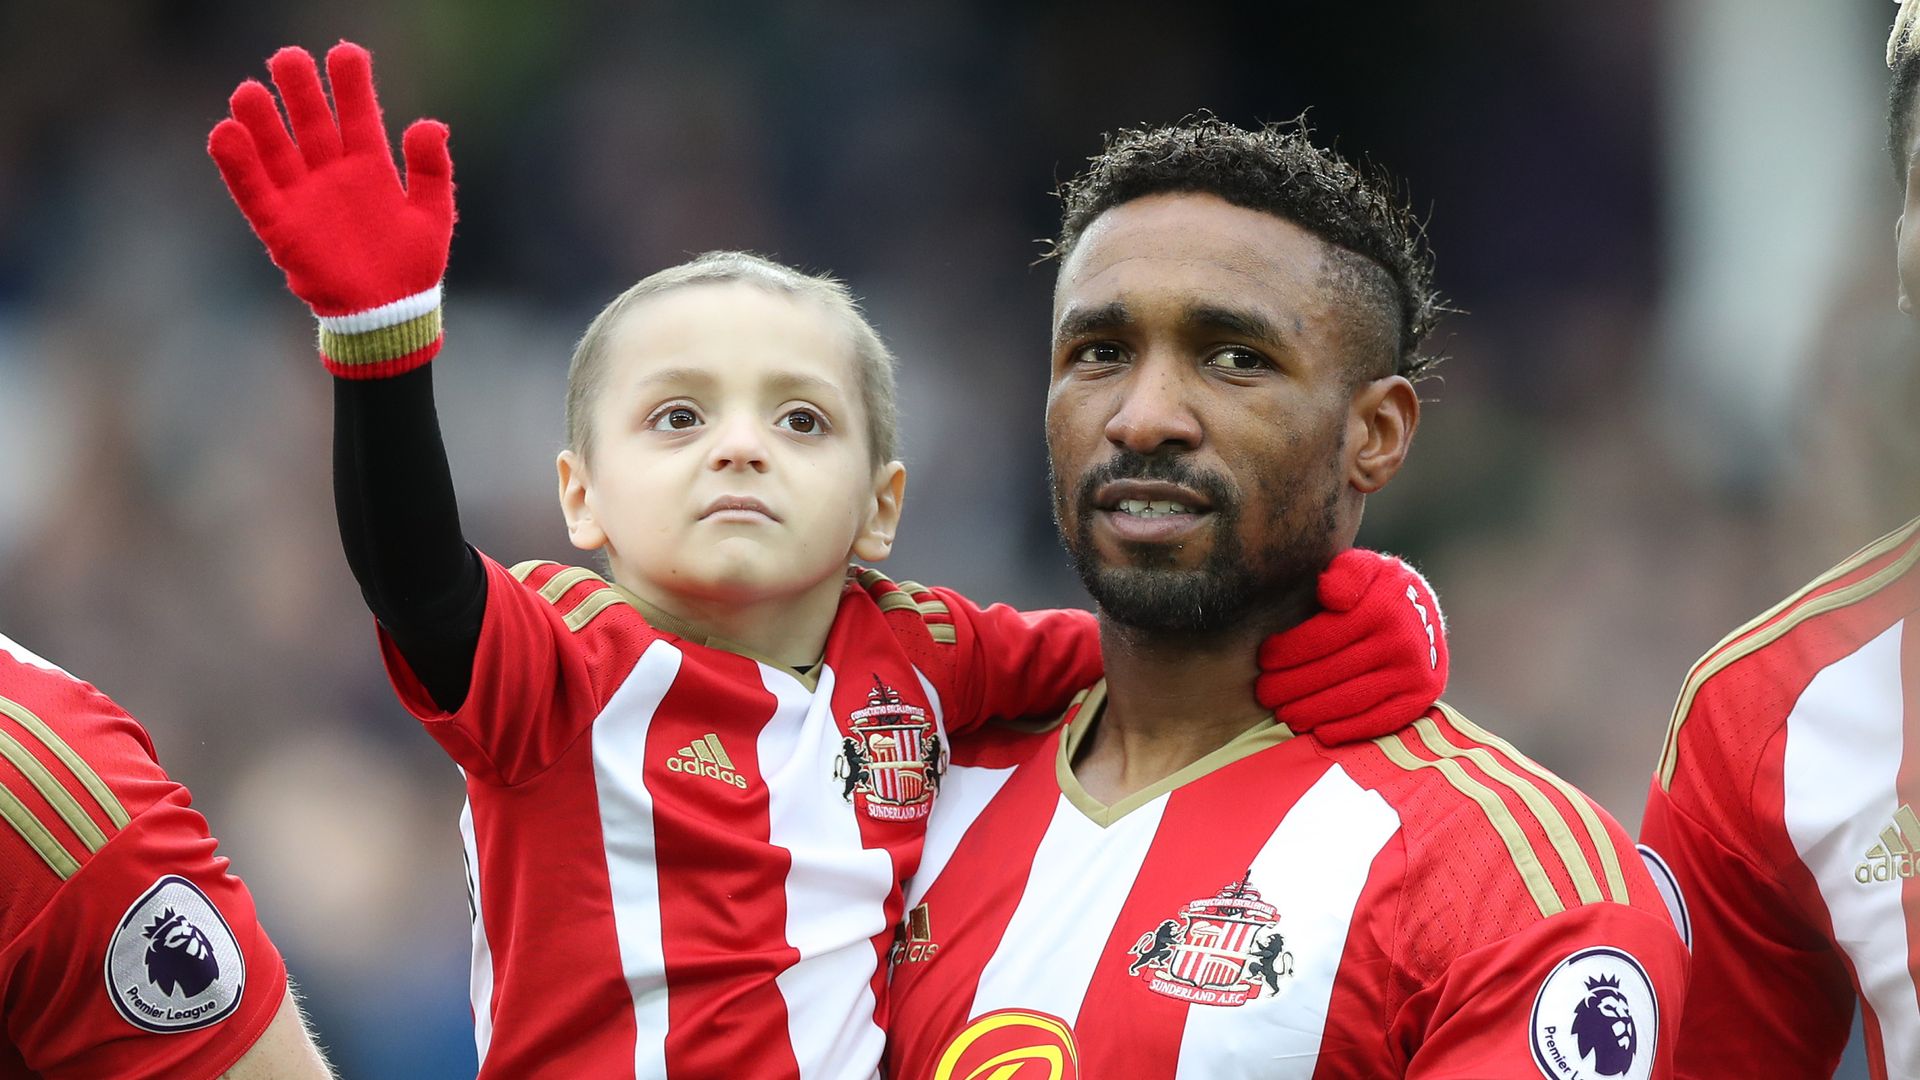 Man, 31, charged with public order offence over Bradley Lowery image